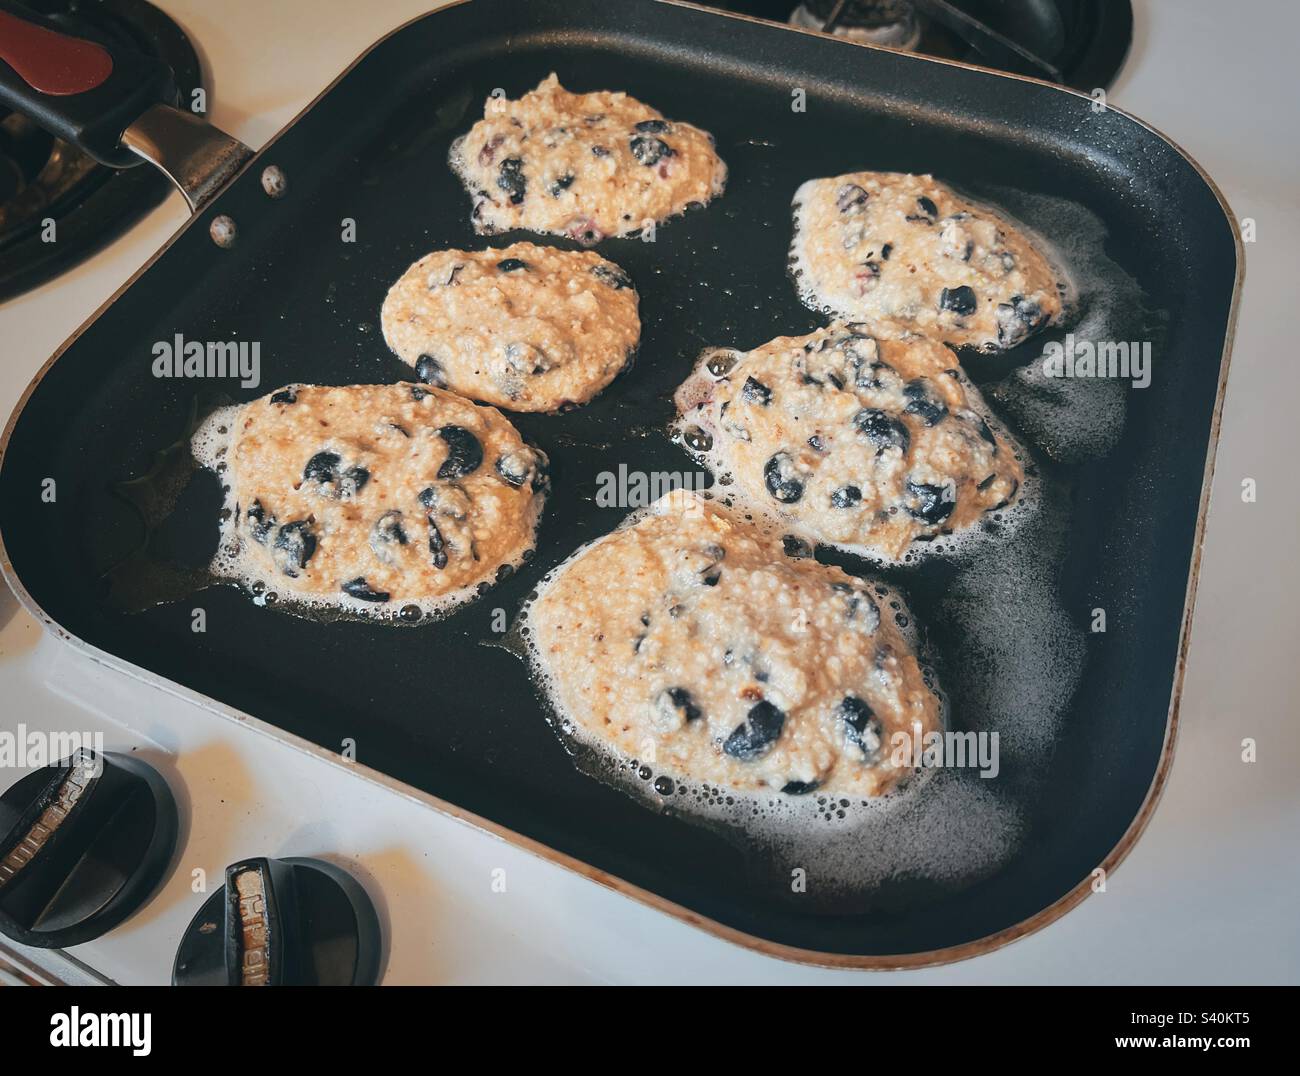 Matzoh meal blueberry pancakes on the frying pan Stock Photo